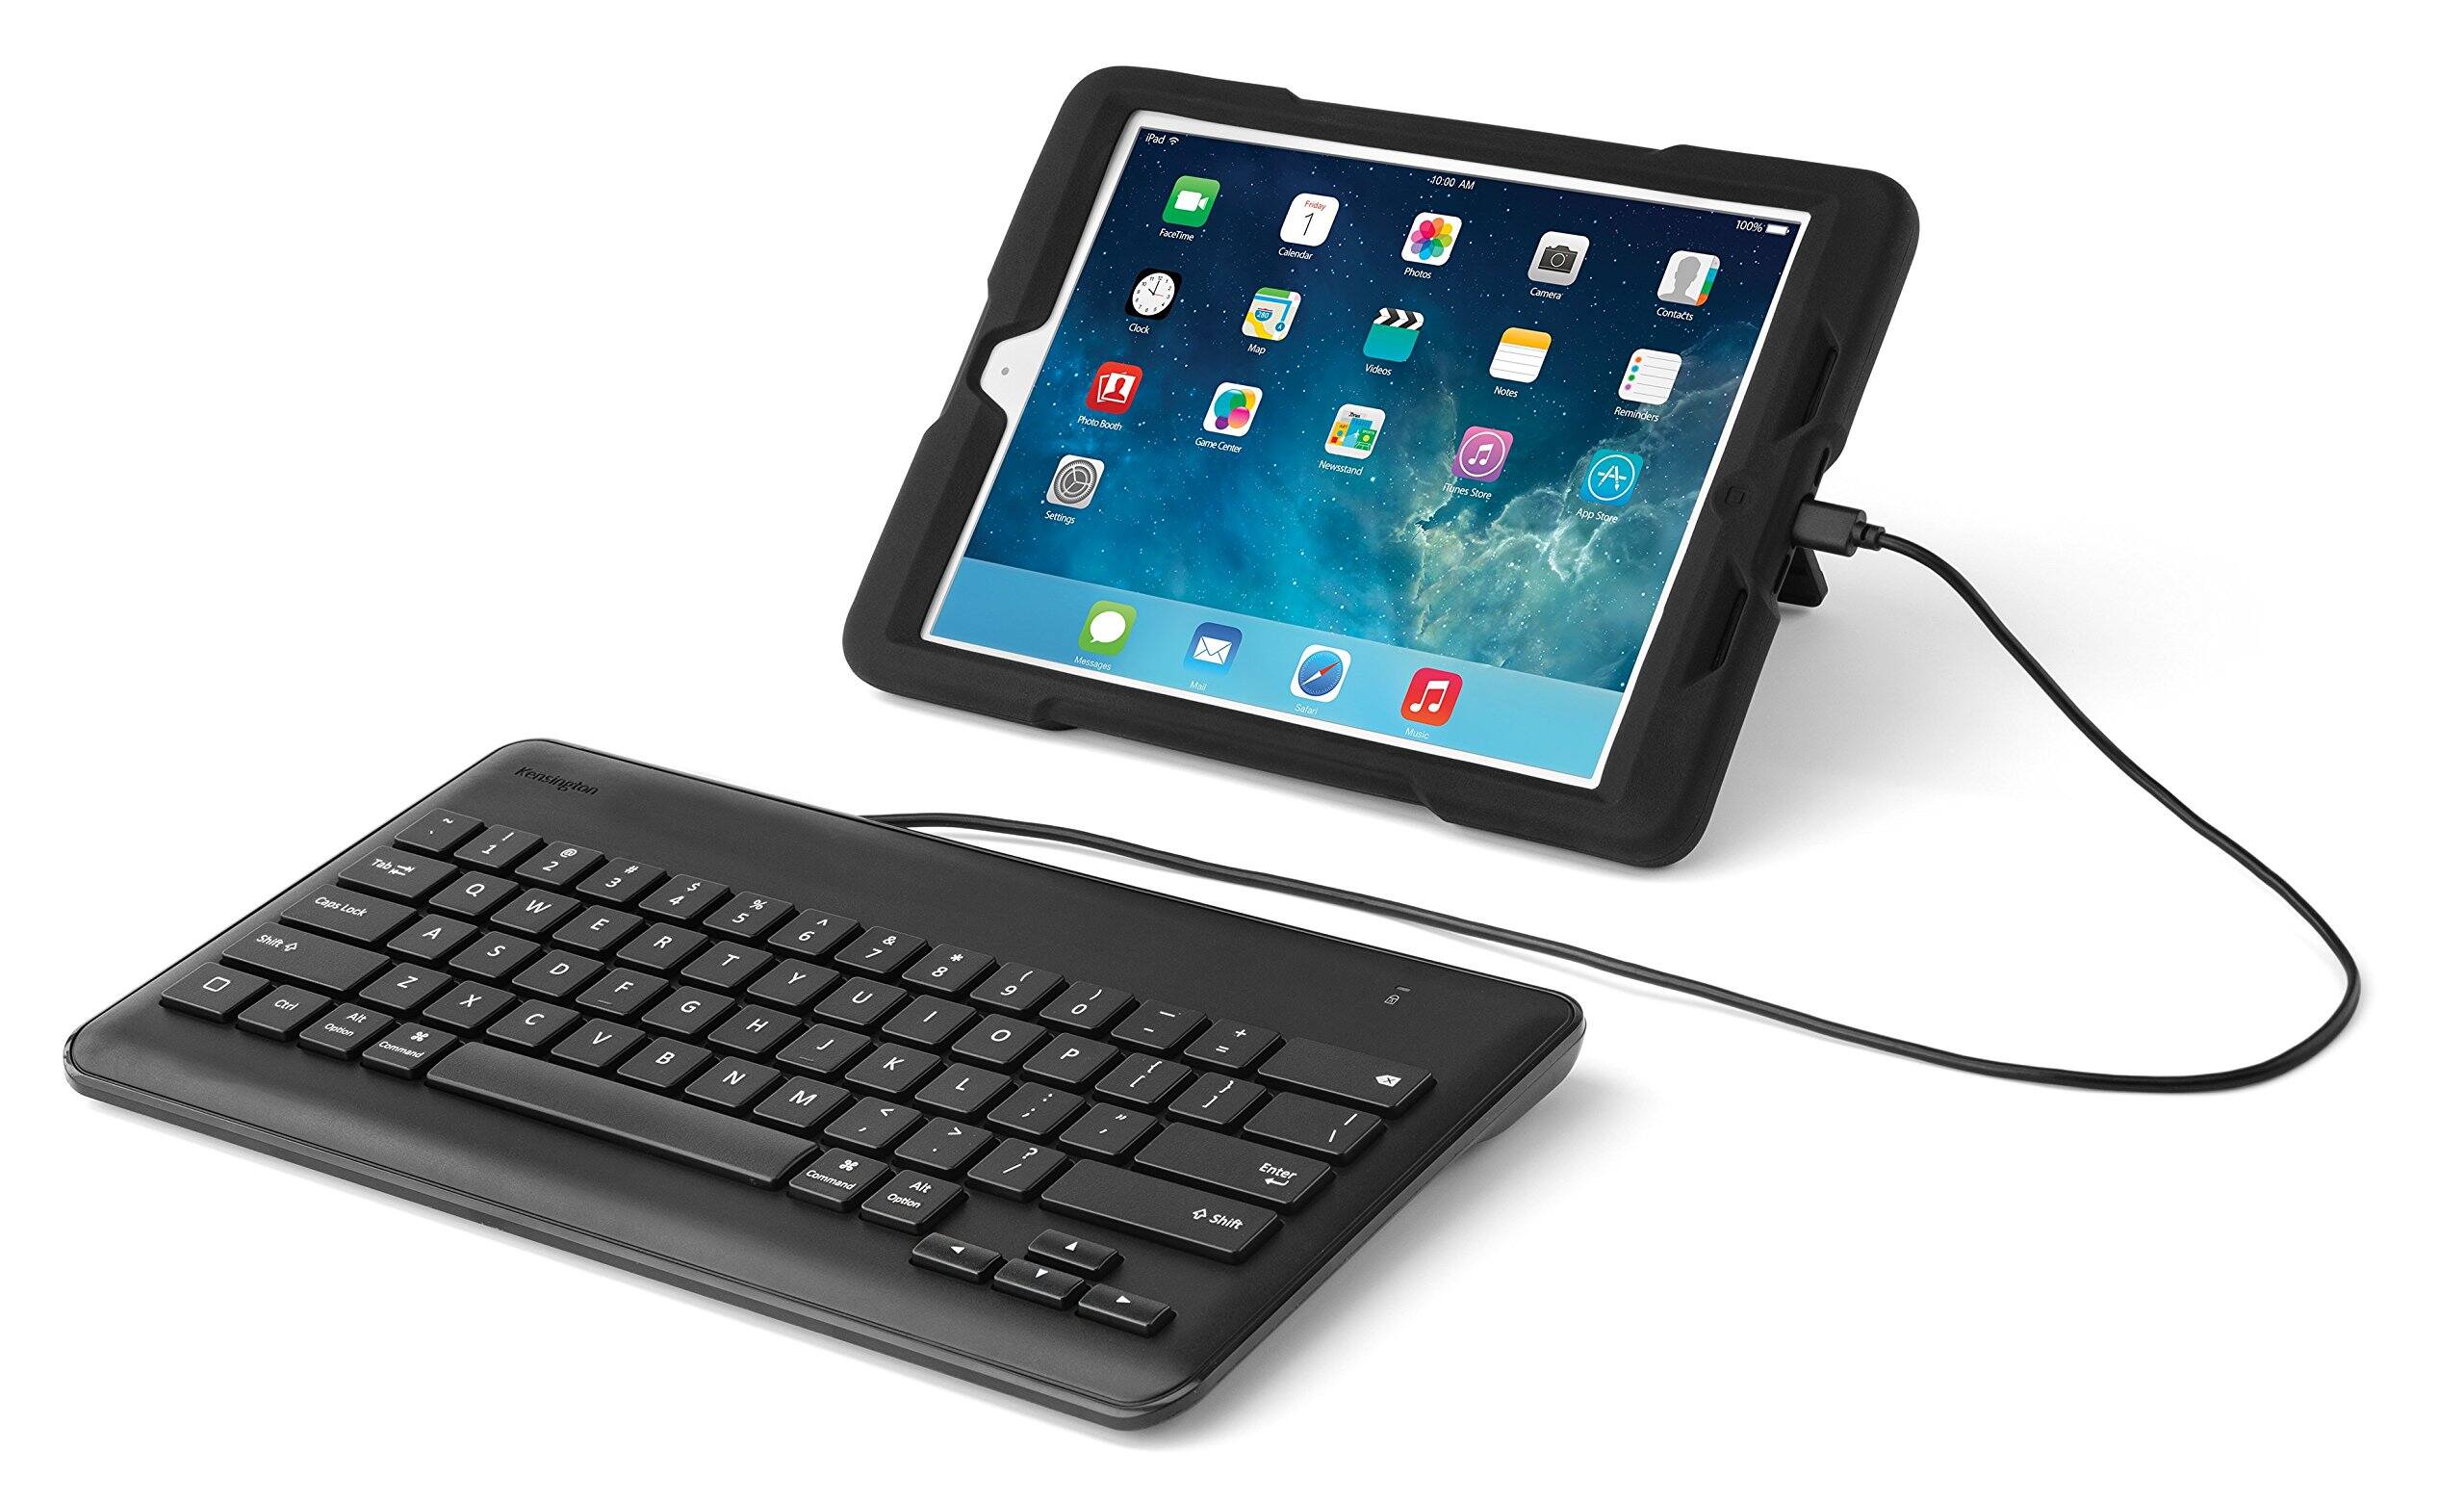 How To Connect Wired Keyboard To Ipad Without Adapter